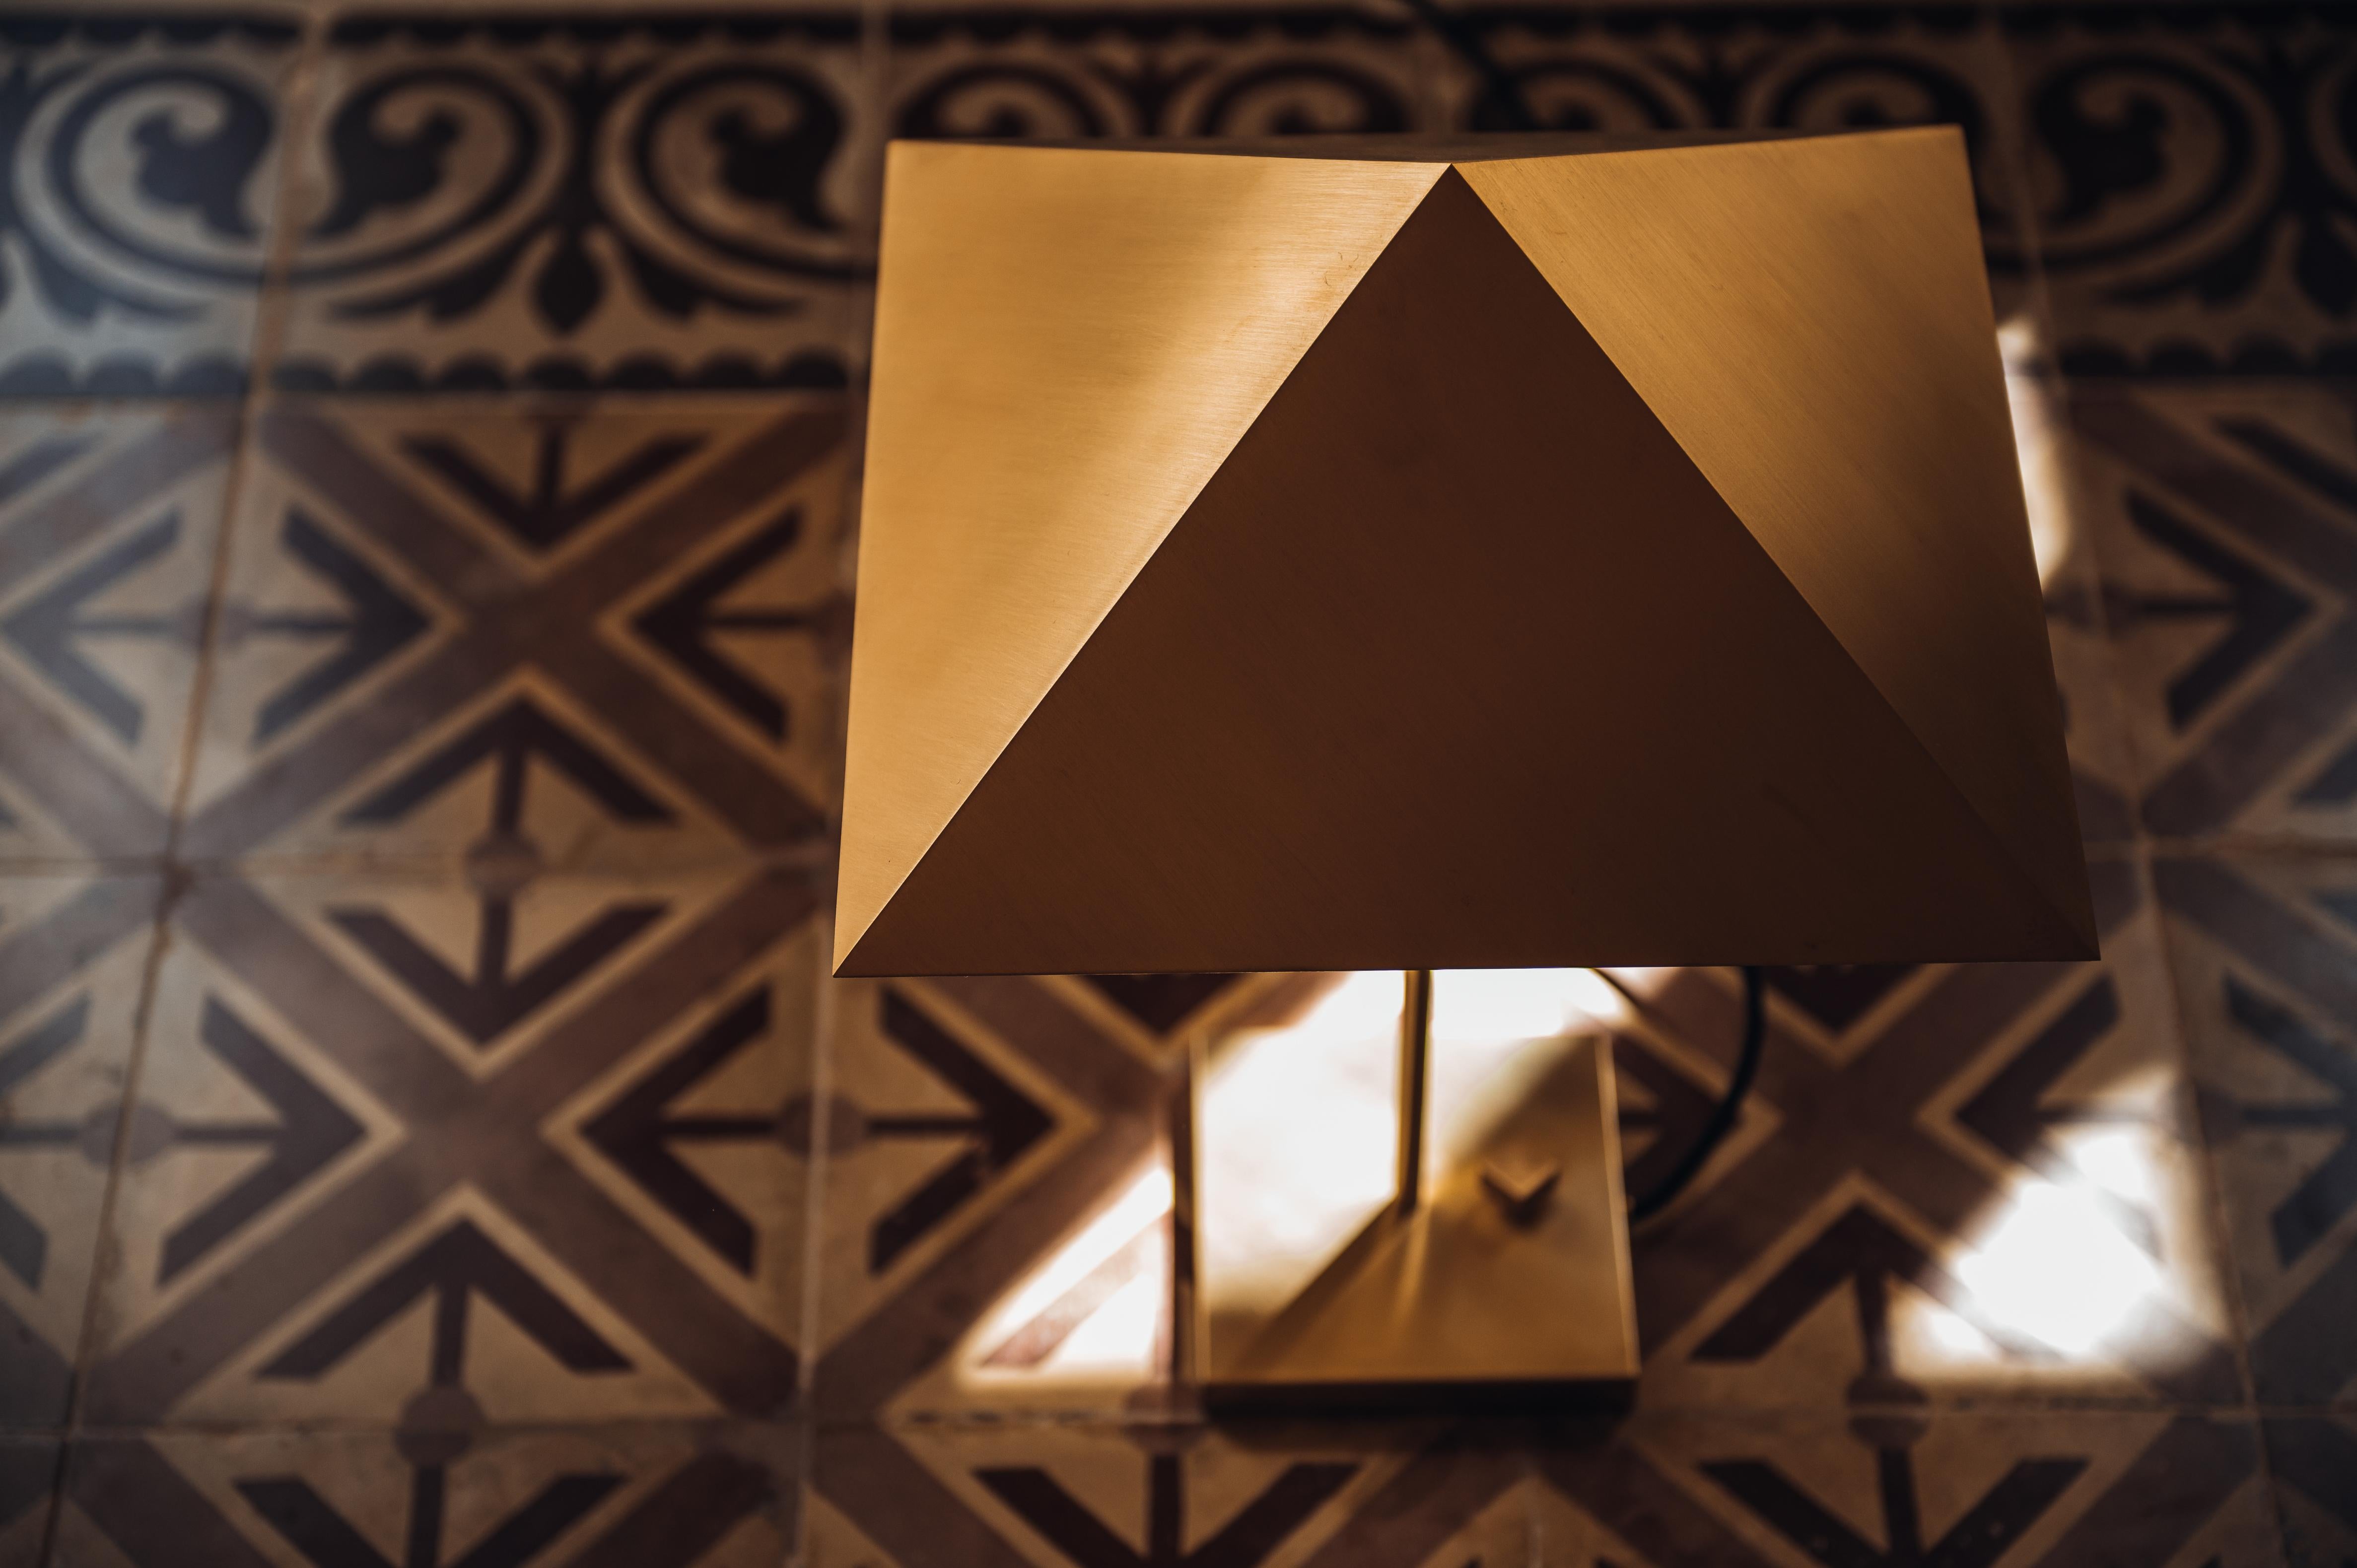 Contemporary Octa Table Lamp Brass by Diaphan Studio, Represented by Tuleste Factory